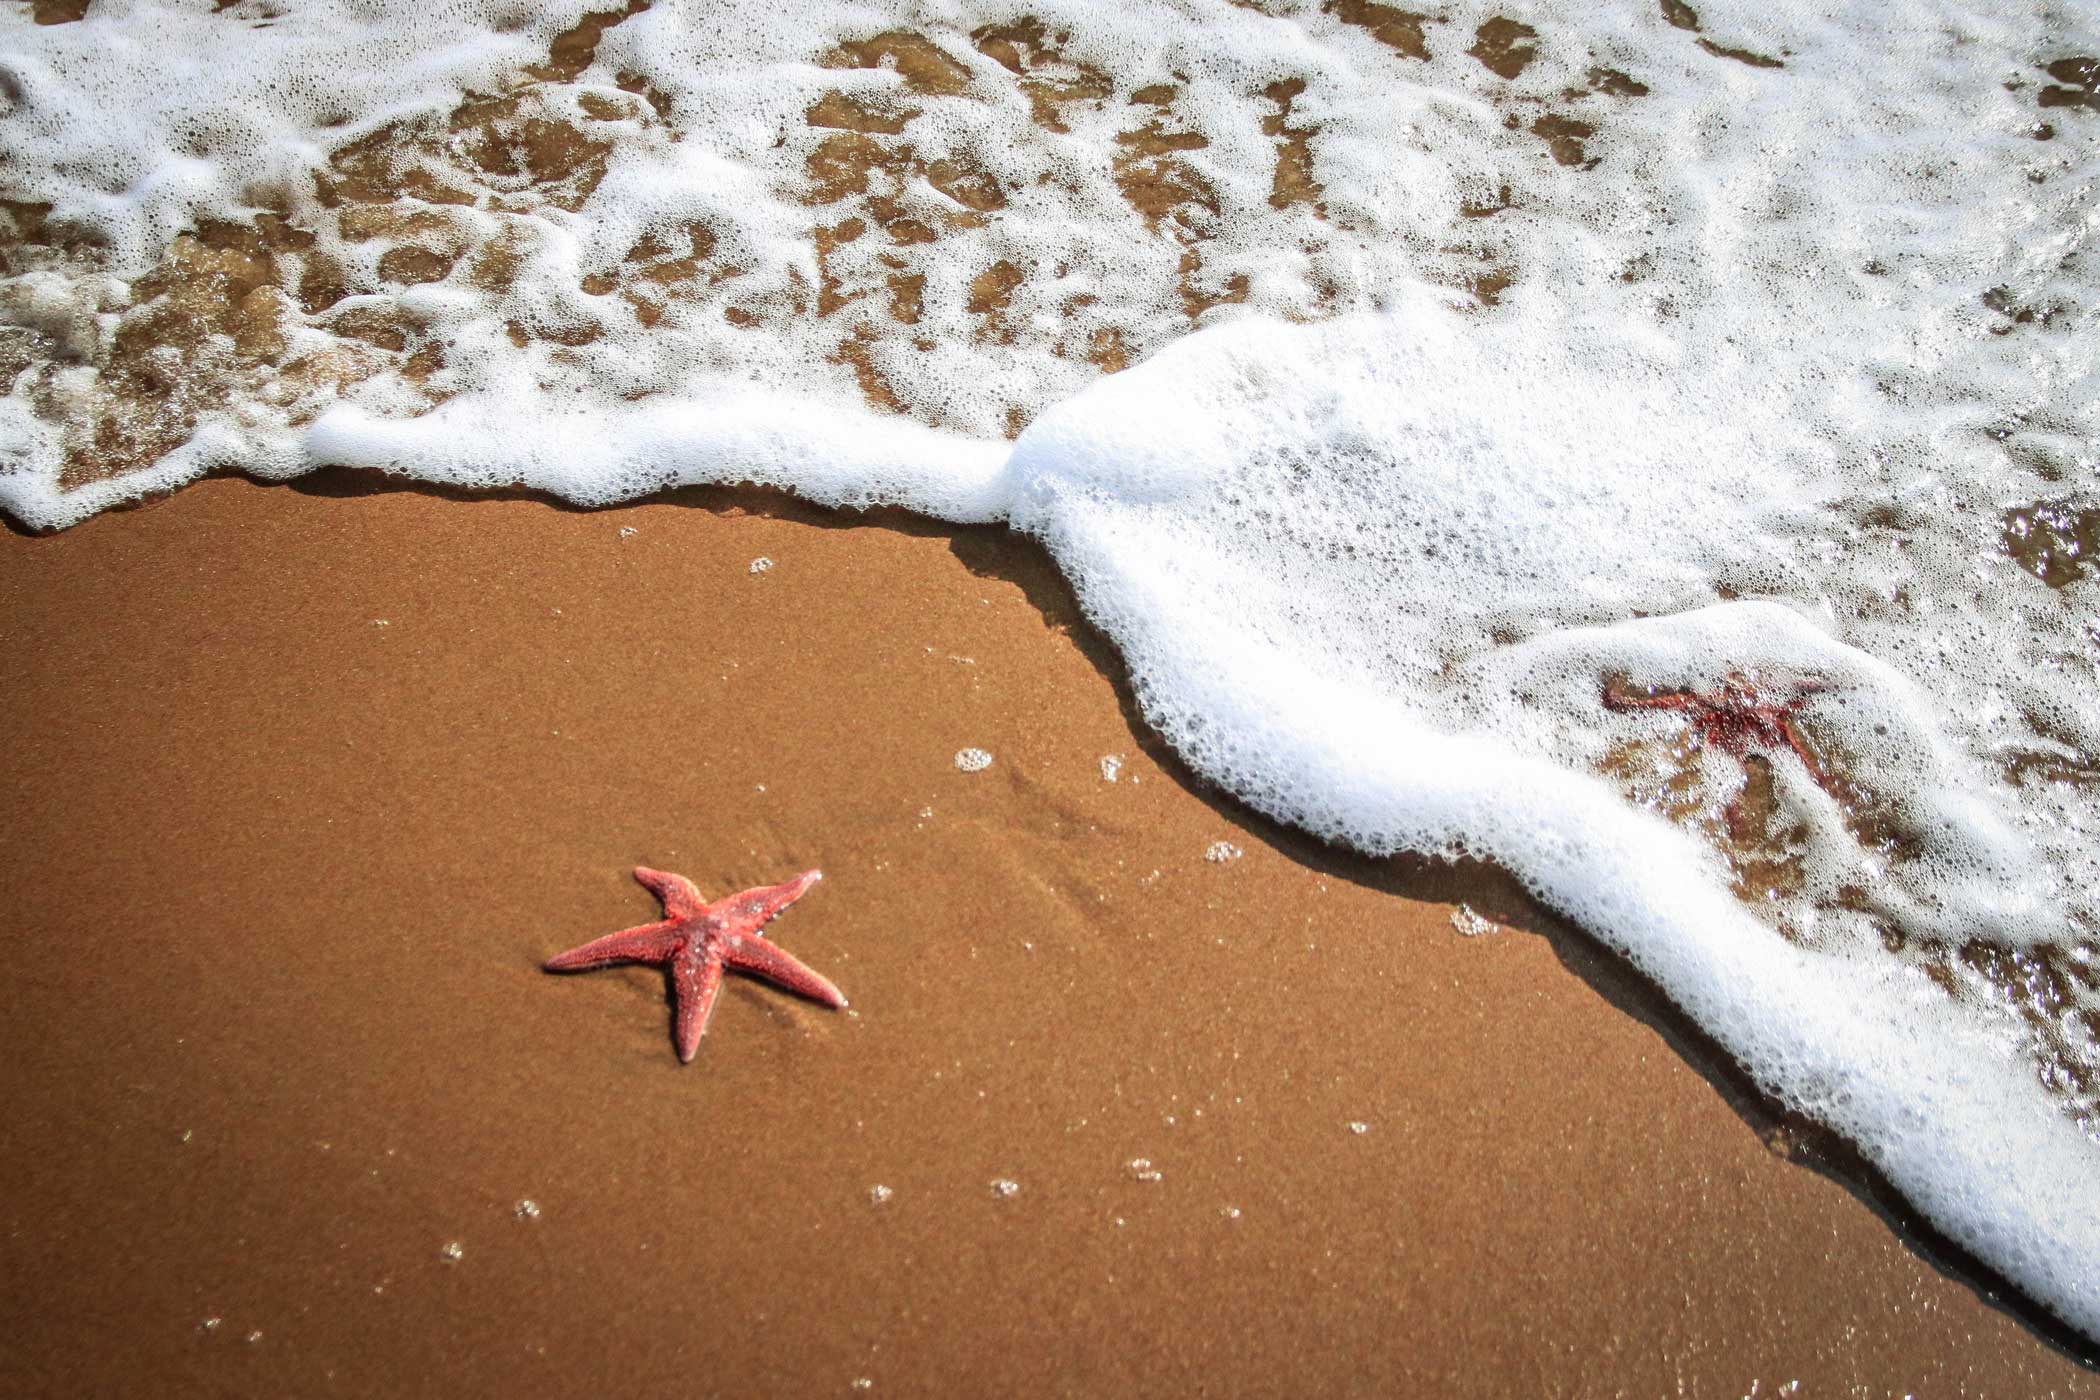 Parable of the Starfish